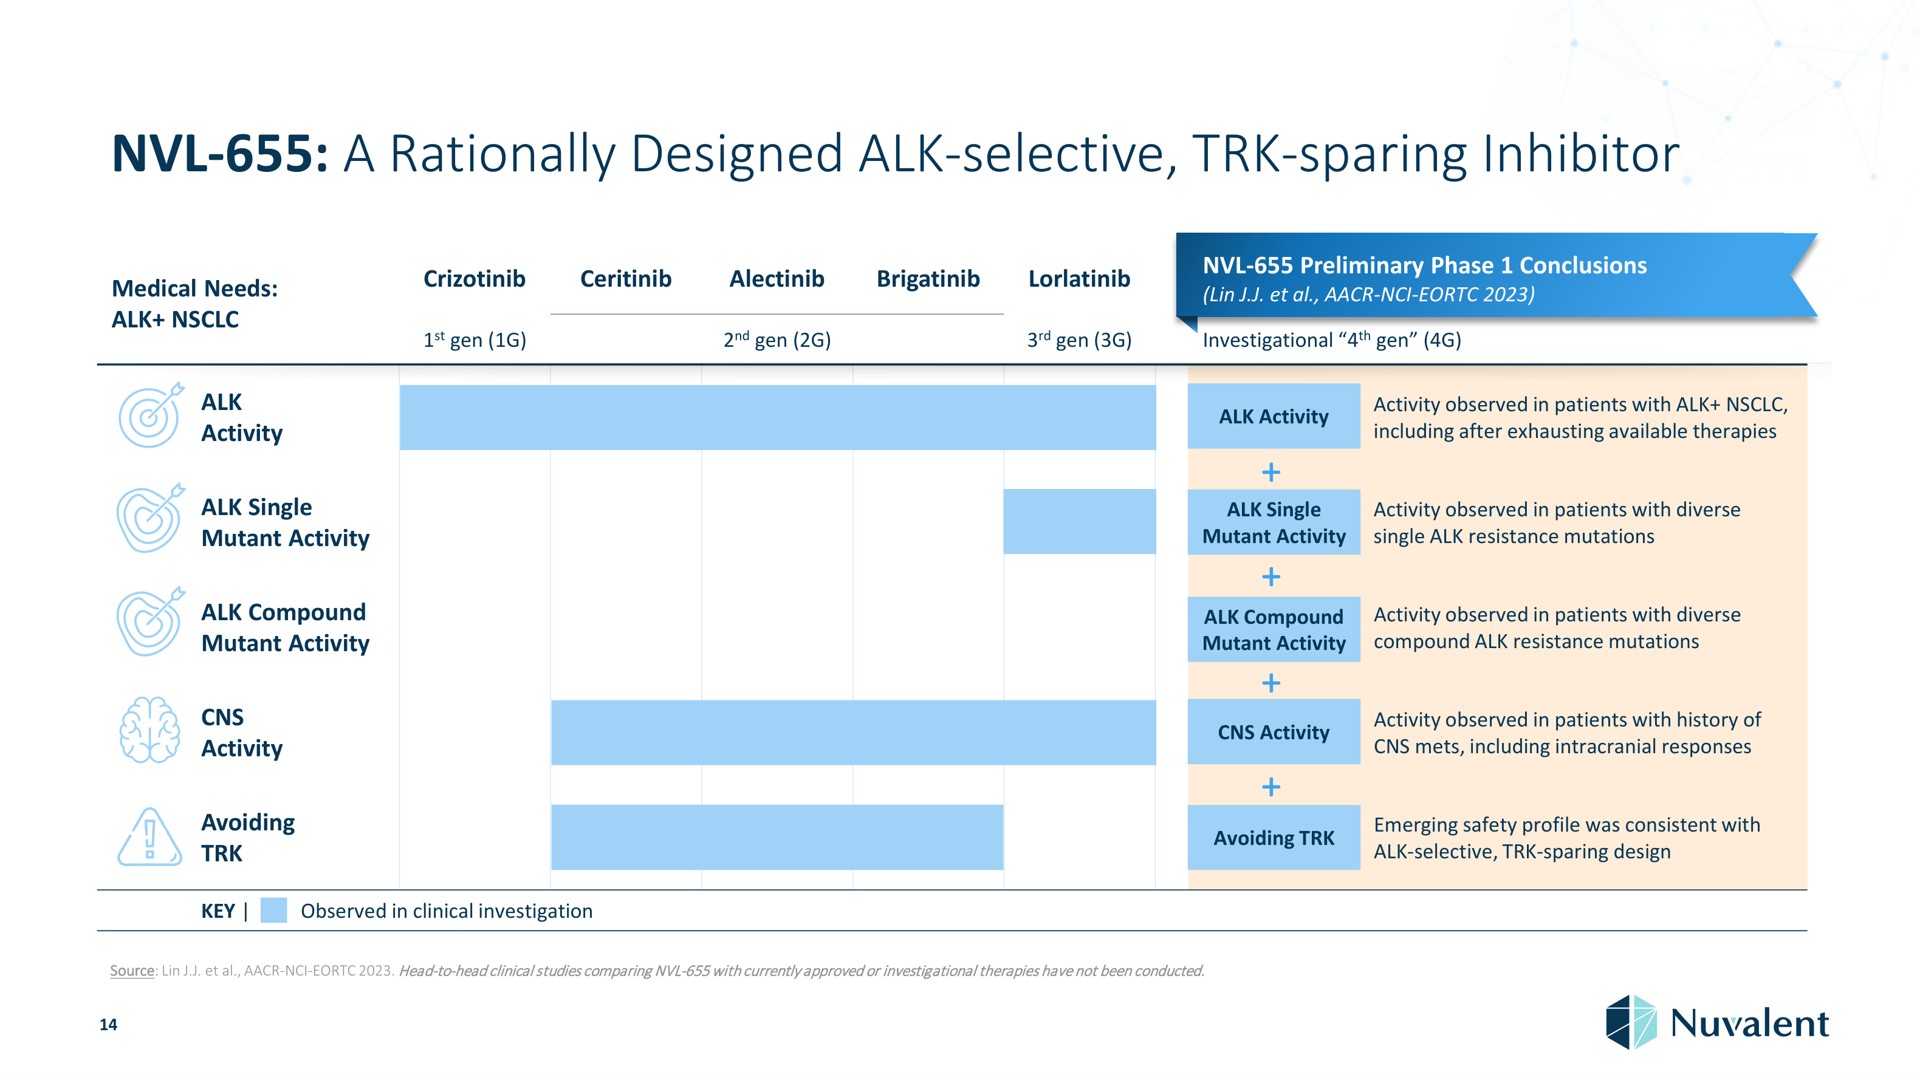 a rationally designed alk selective sparing inhibitor medical needs preliminary phase conclusions alk gen gen gen investigational gen activity alk single mutant activity alk compound mutant activity activity avoiding alk activity activity observed in patients with alk including after exhausting available therapies alk single mutant activity activity observed in patients with diverse single alk resistance mutations alk compound mutant activity activity observed in patients with diverse compound alk resistance mutations activity avoiding activity observed in patients with history of including intracranial responses emerging safety profile was consistent with design key observed in clinical investigation source lin head to head clinical studies comparing with currently approved or investigational therapies have not been conducted | Nuvalent